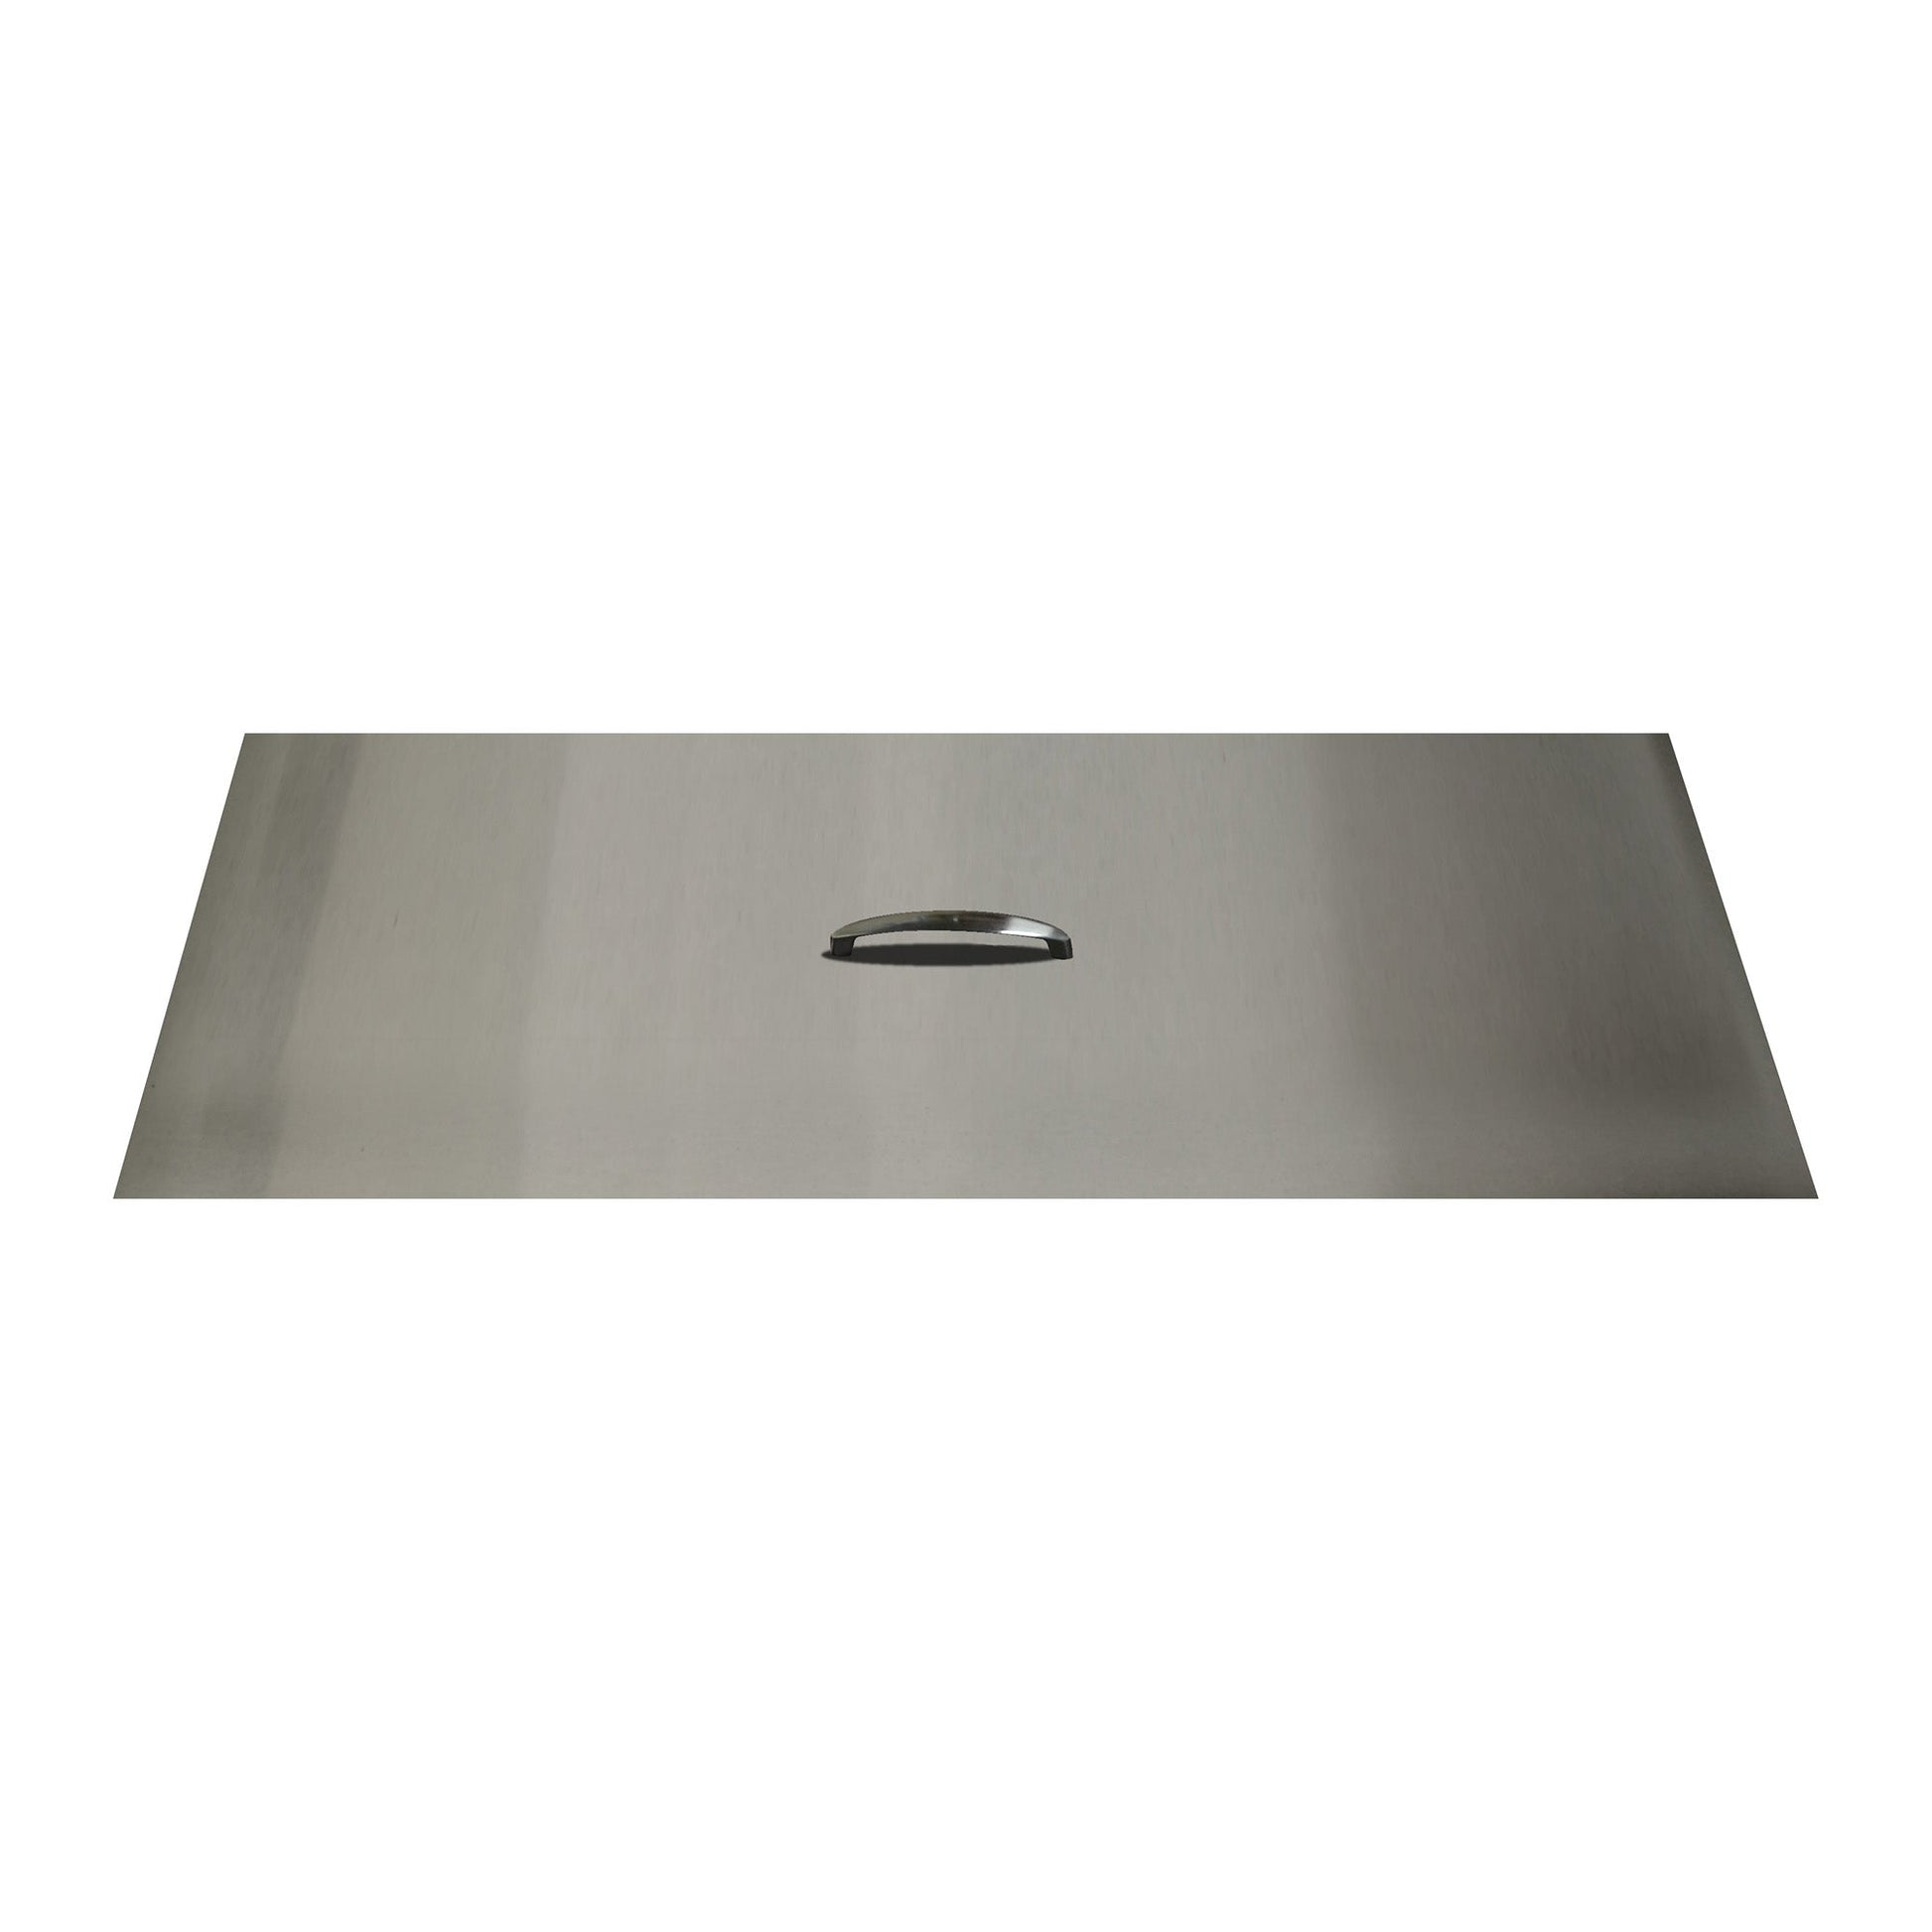 The Outdoor Plus 49" x 21" Stainless Steel Rectangular Fire Pit Lid Cover